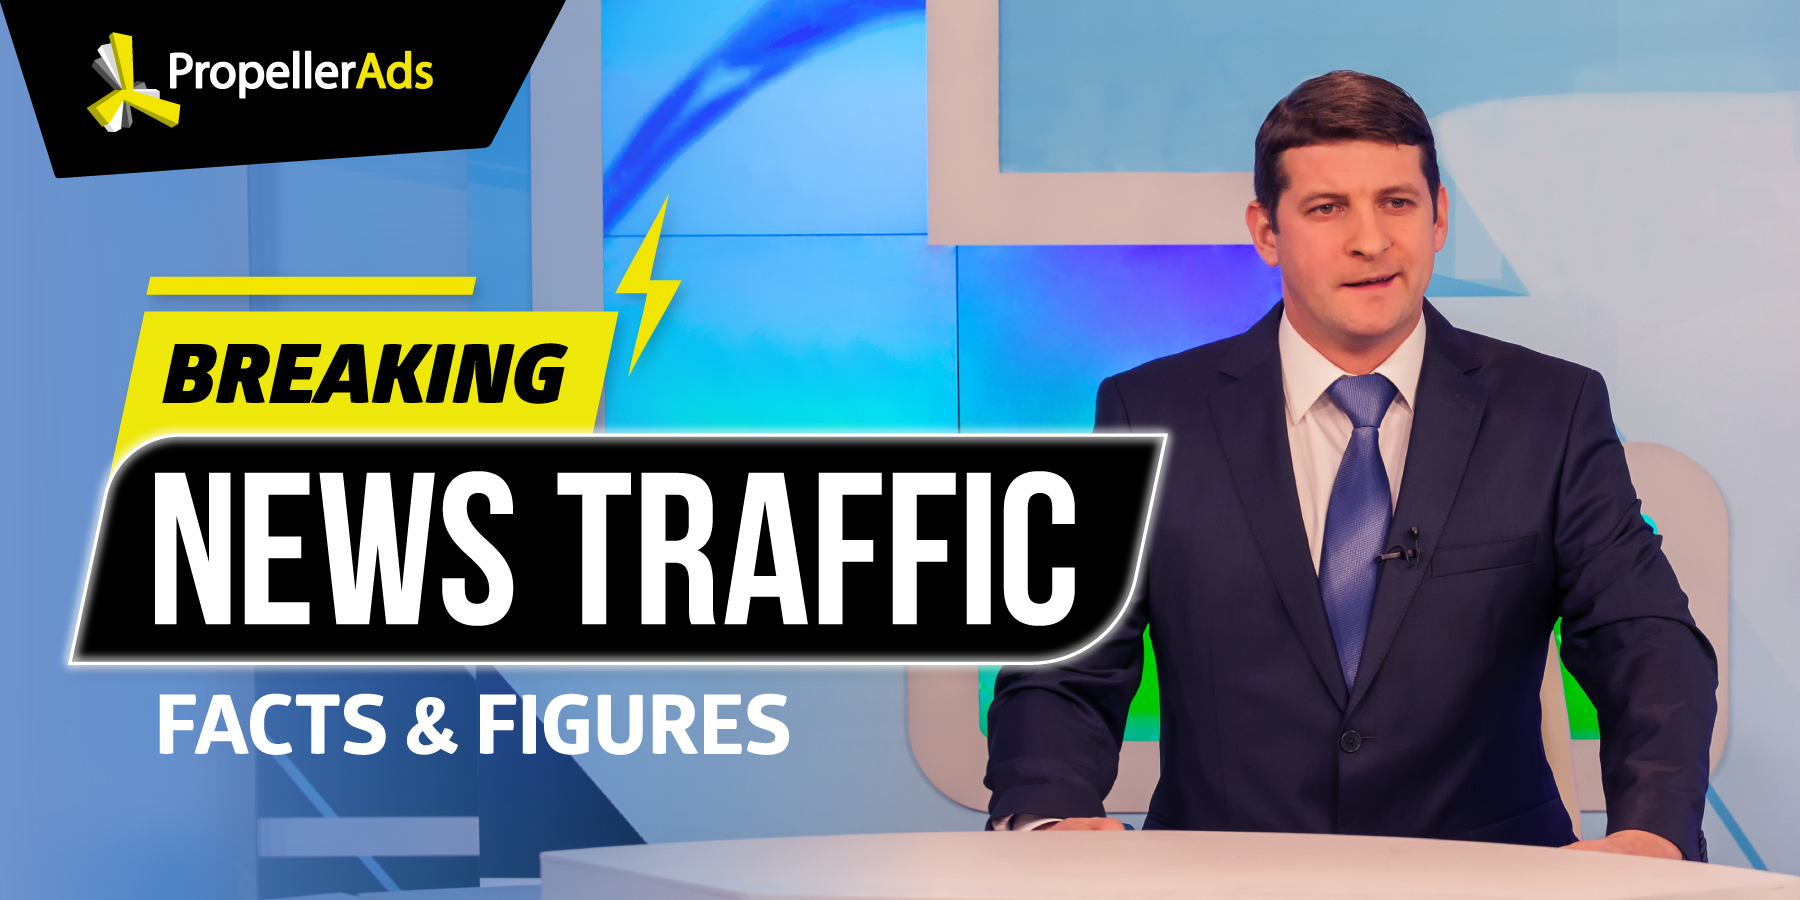 New_traffic_Article